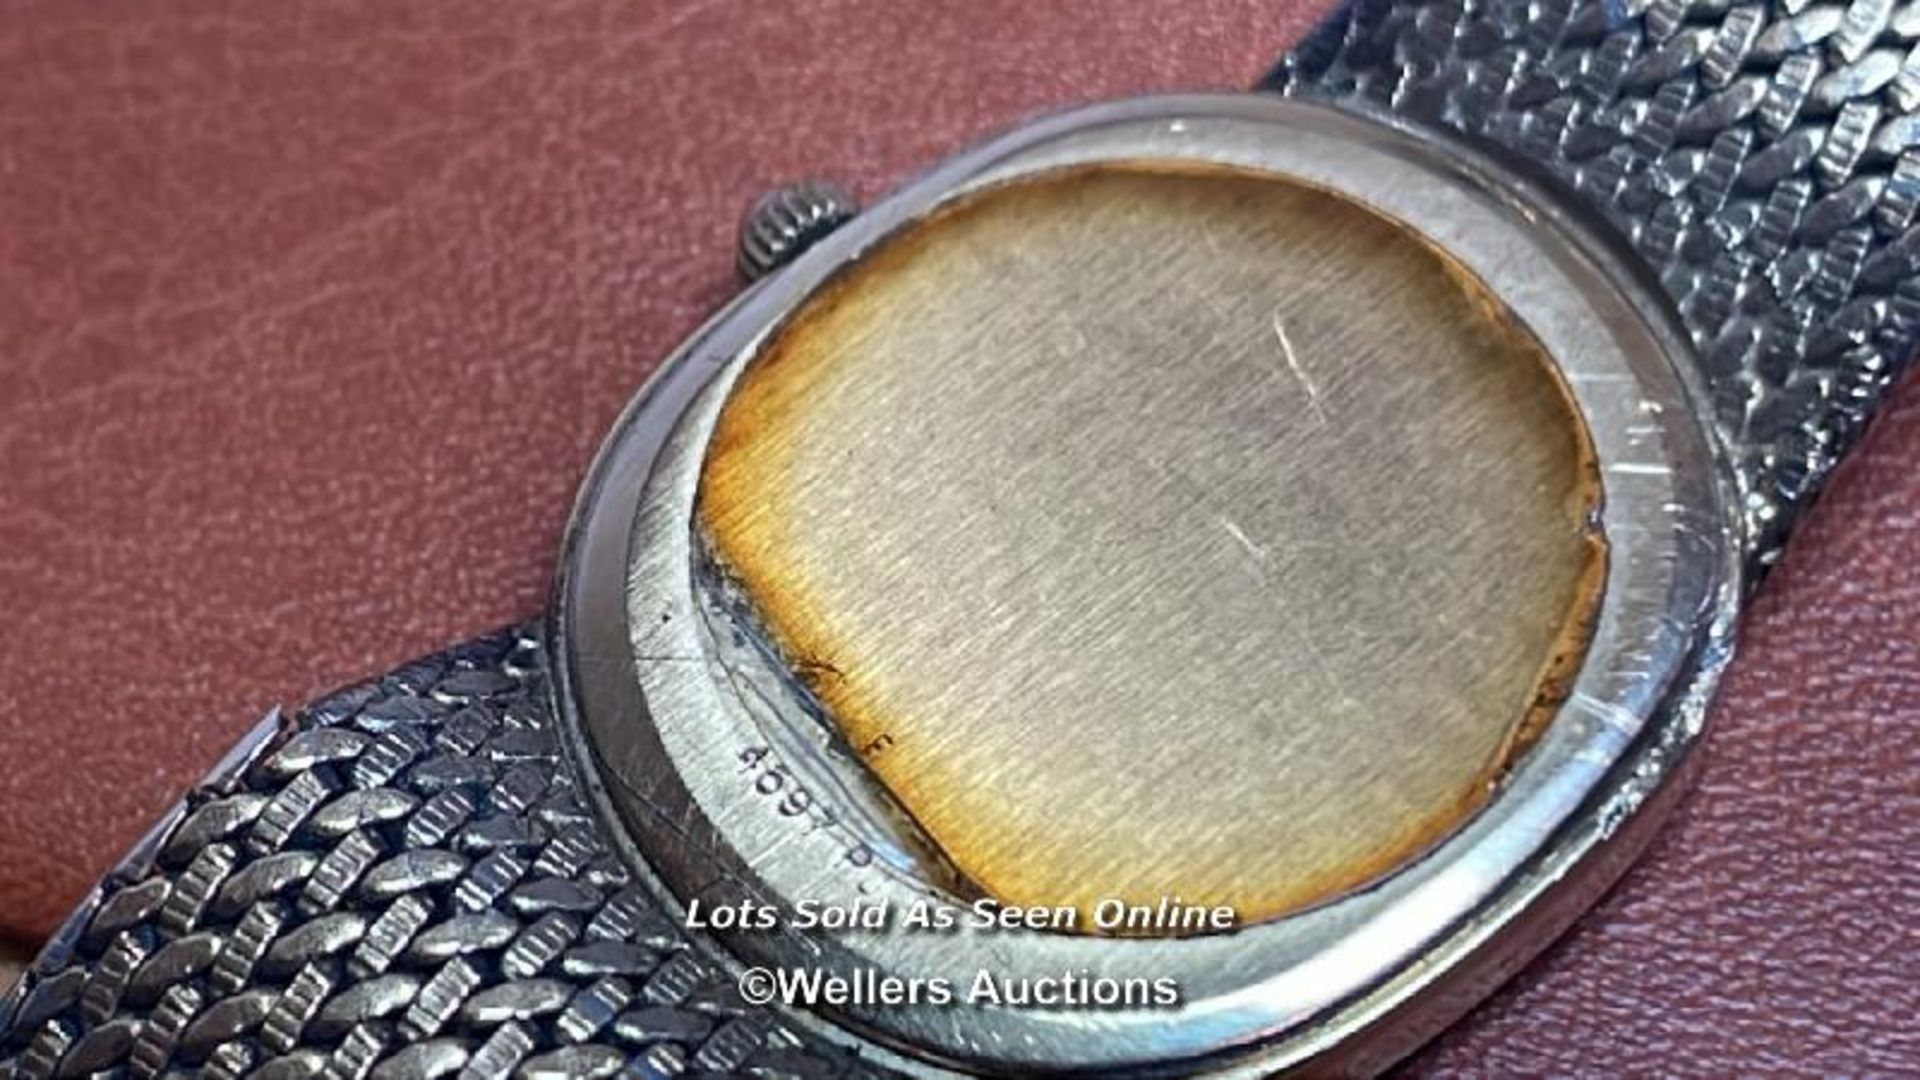 Vintage Girrard Perregaux ellipse gold plated dress watch, 2.5cm wide dial with box - Image 7 of 12